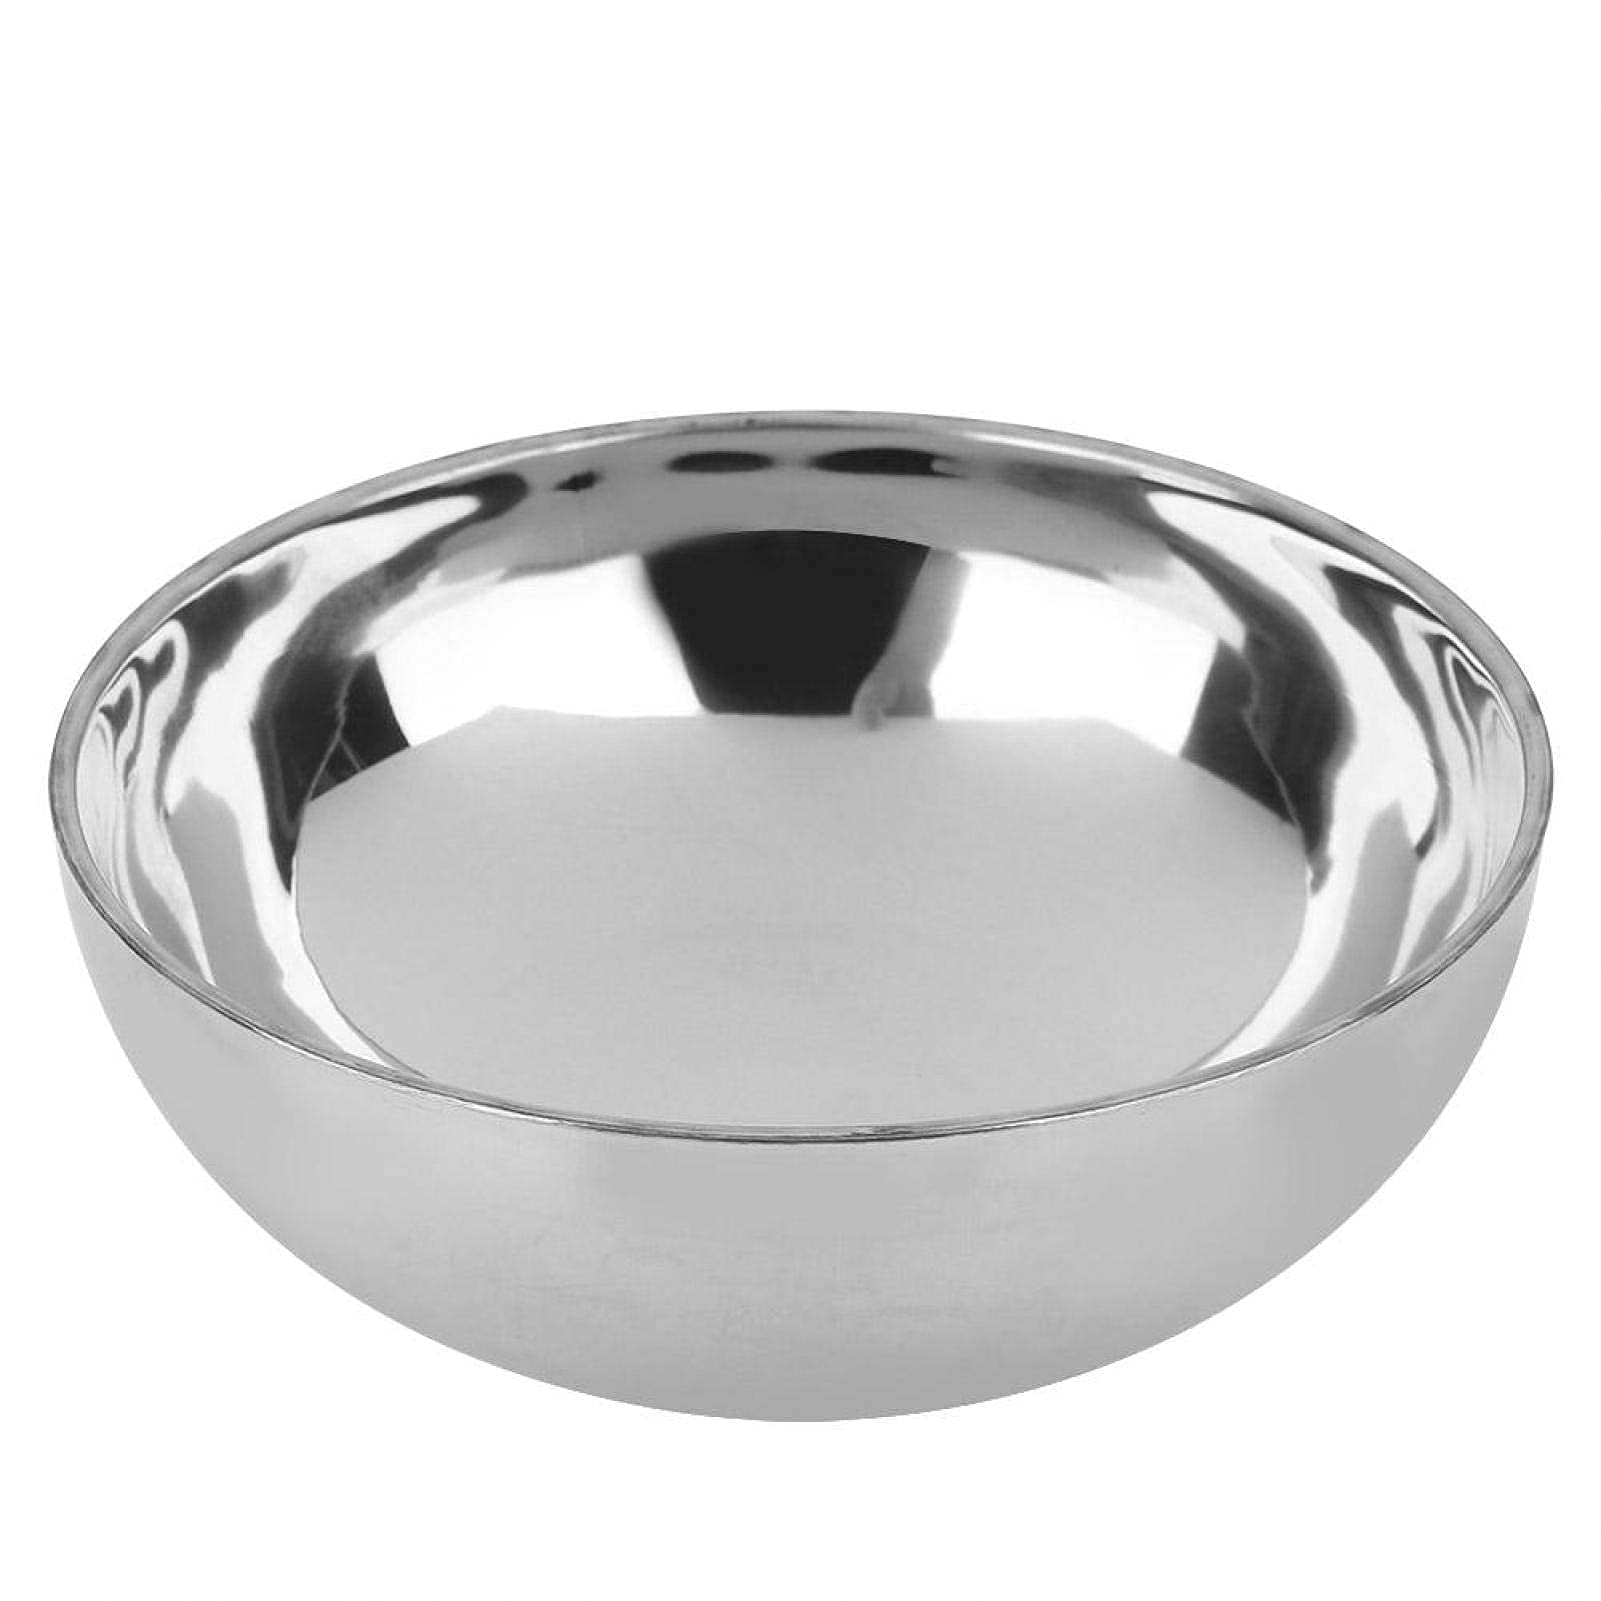 34 Oz/ 1000ml Stainless Steel Mixing Bowls Double Wall Serving Bowl Insulated Cereal Bowl Salad Bowl Stainless Steel Bowl Stainless Steel Water Bowl